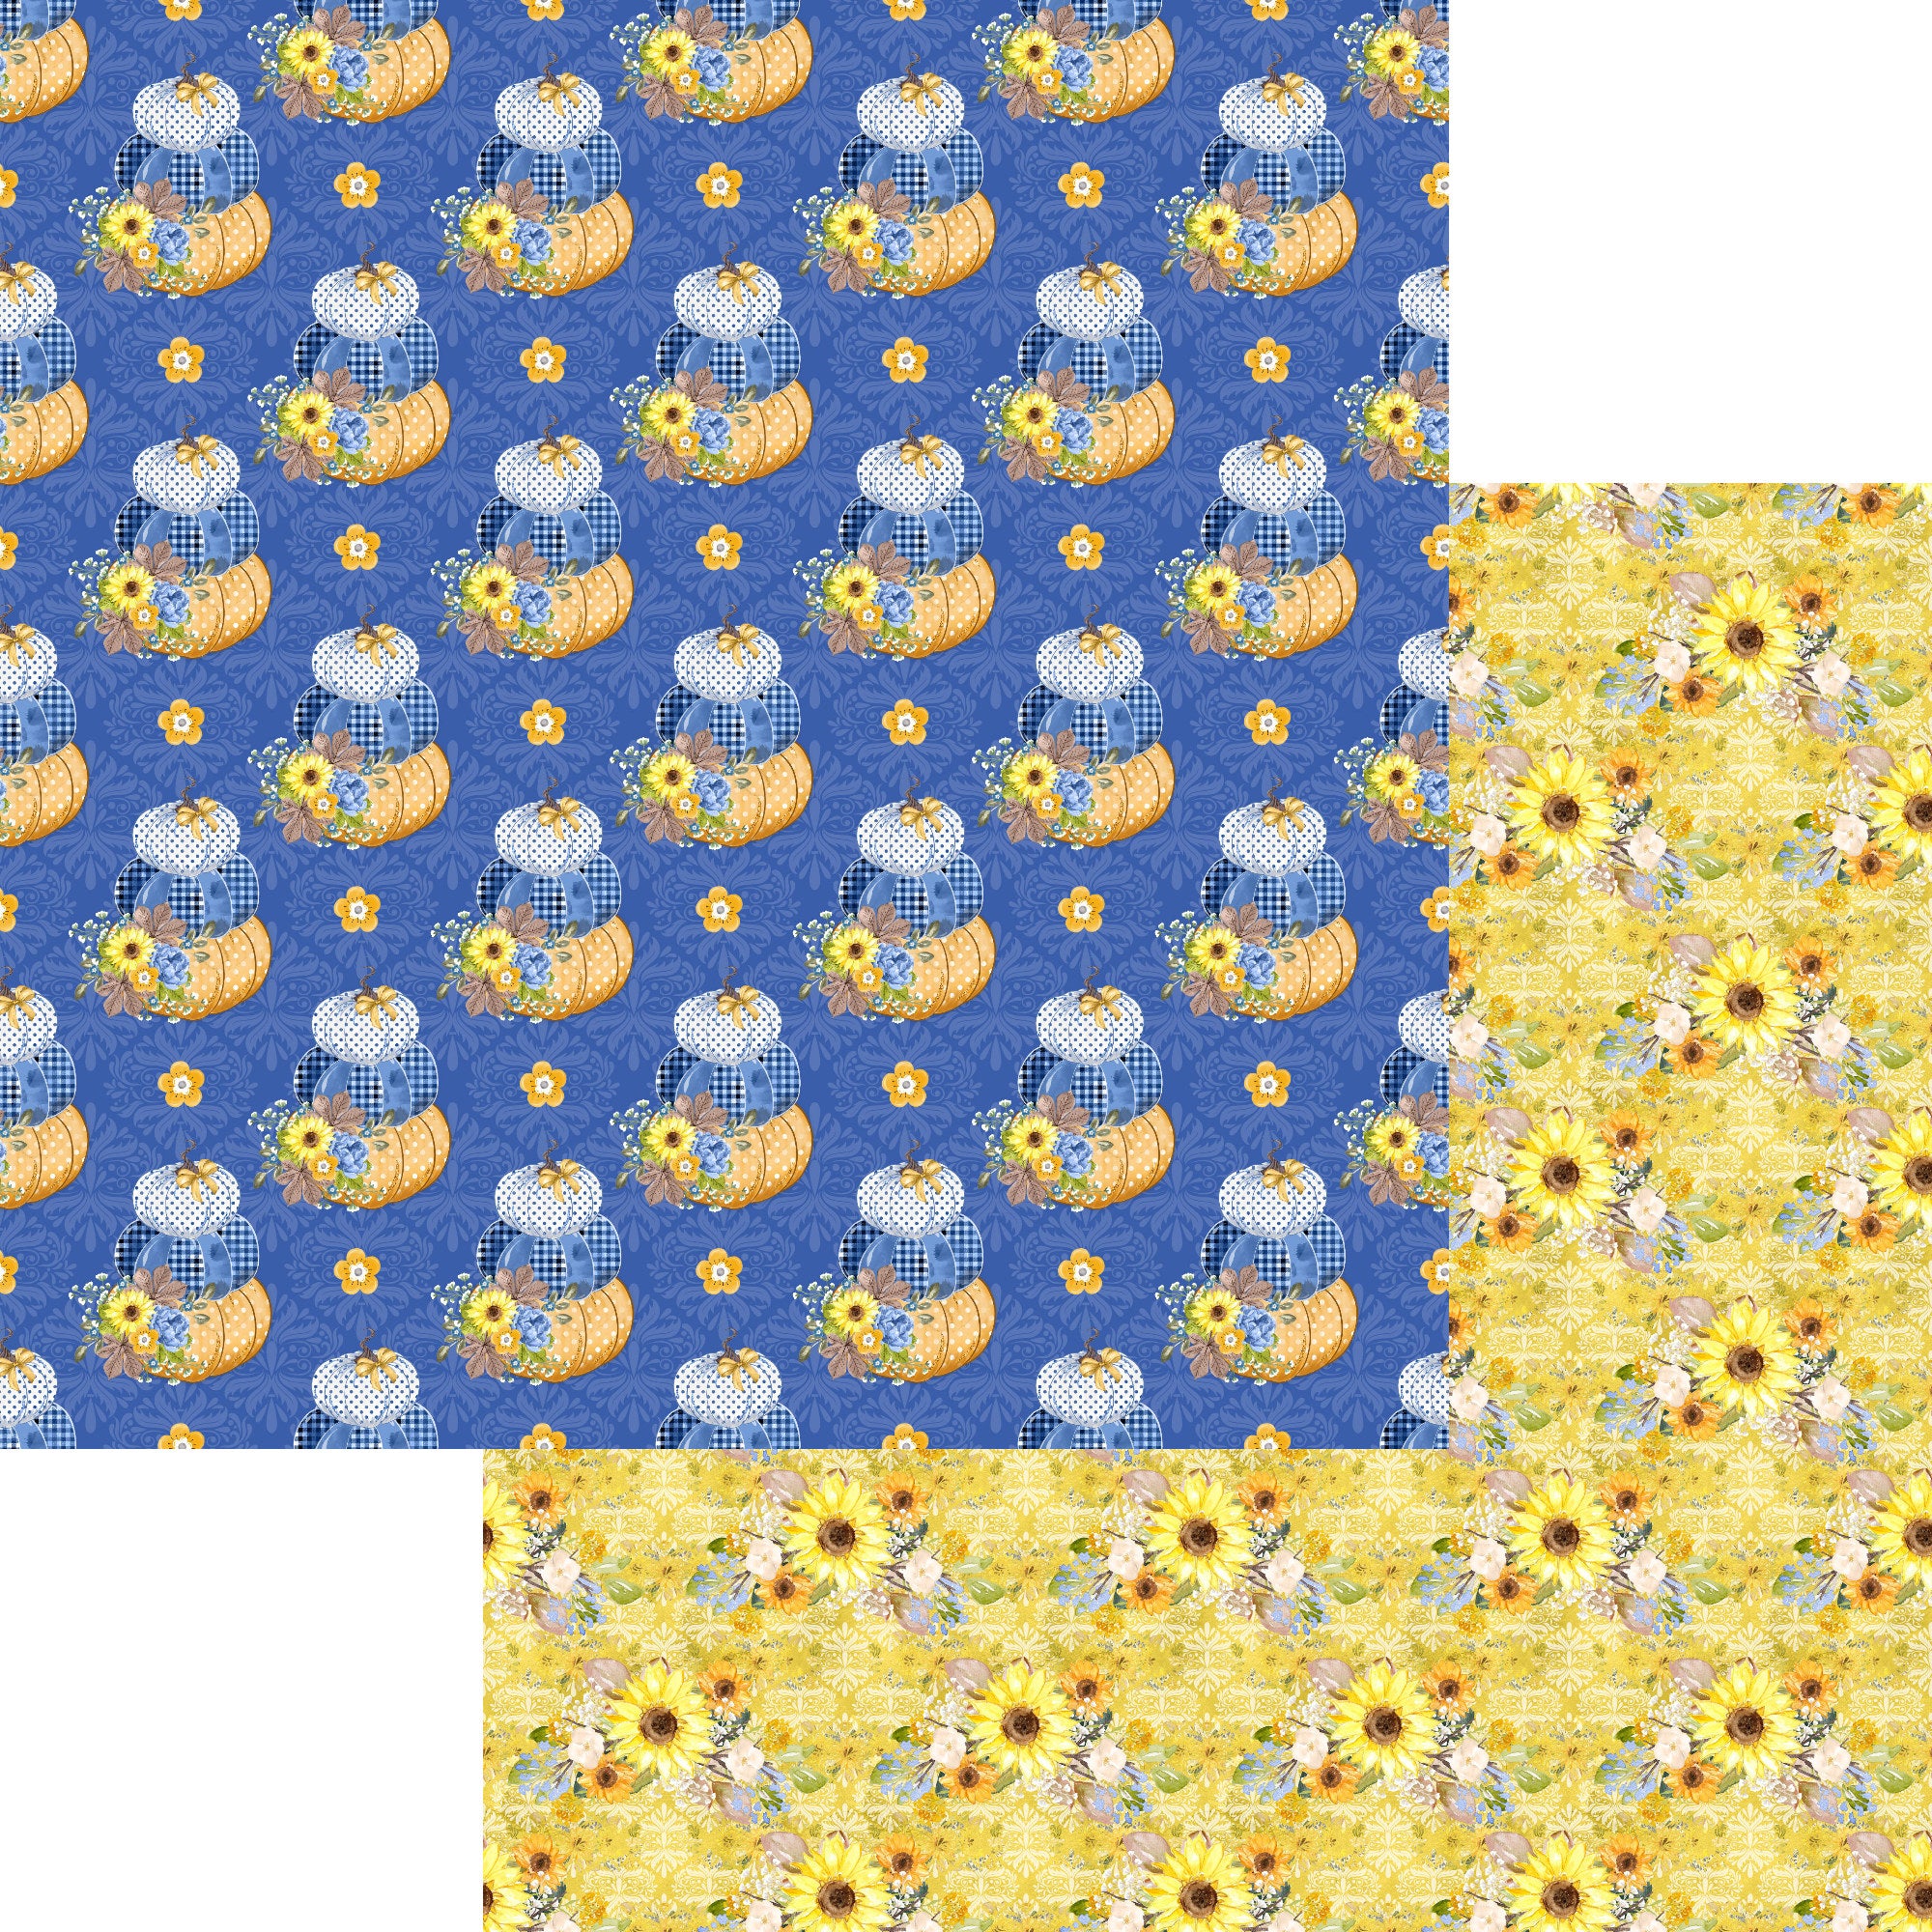 Bumblebee Fall Collection Sunflower Flourish 12 x 12 Double-Sided Scrapbook Paper by SSC Designs